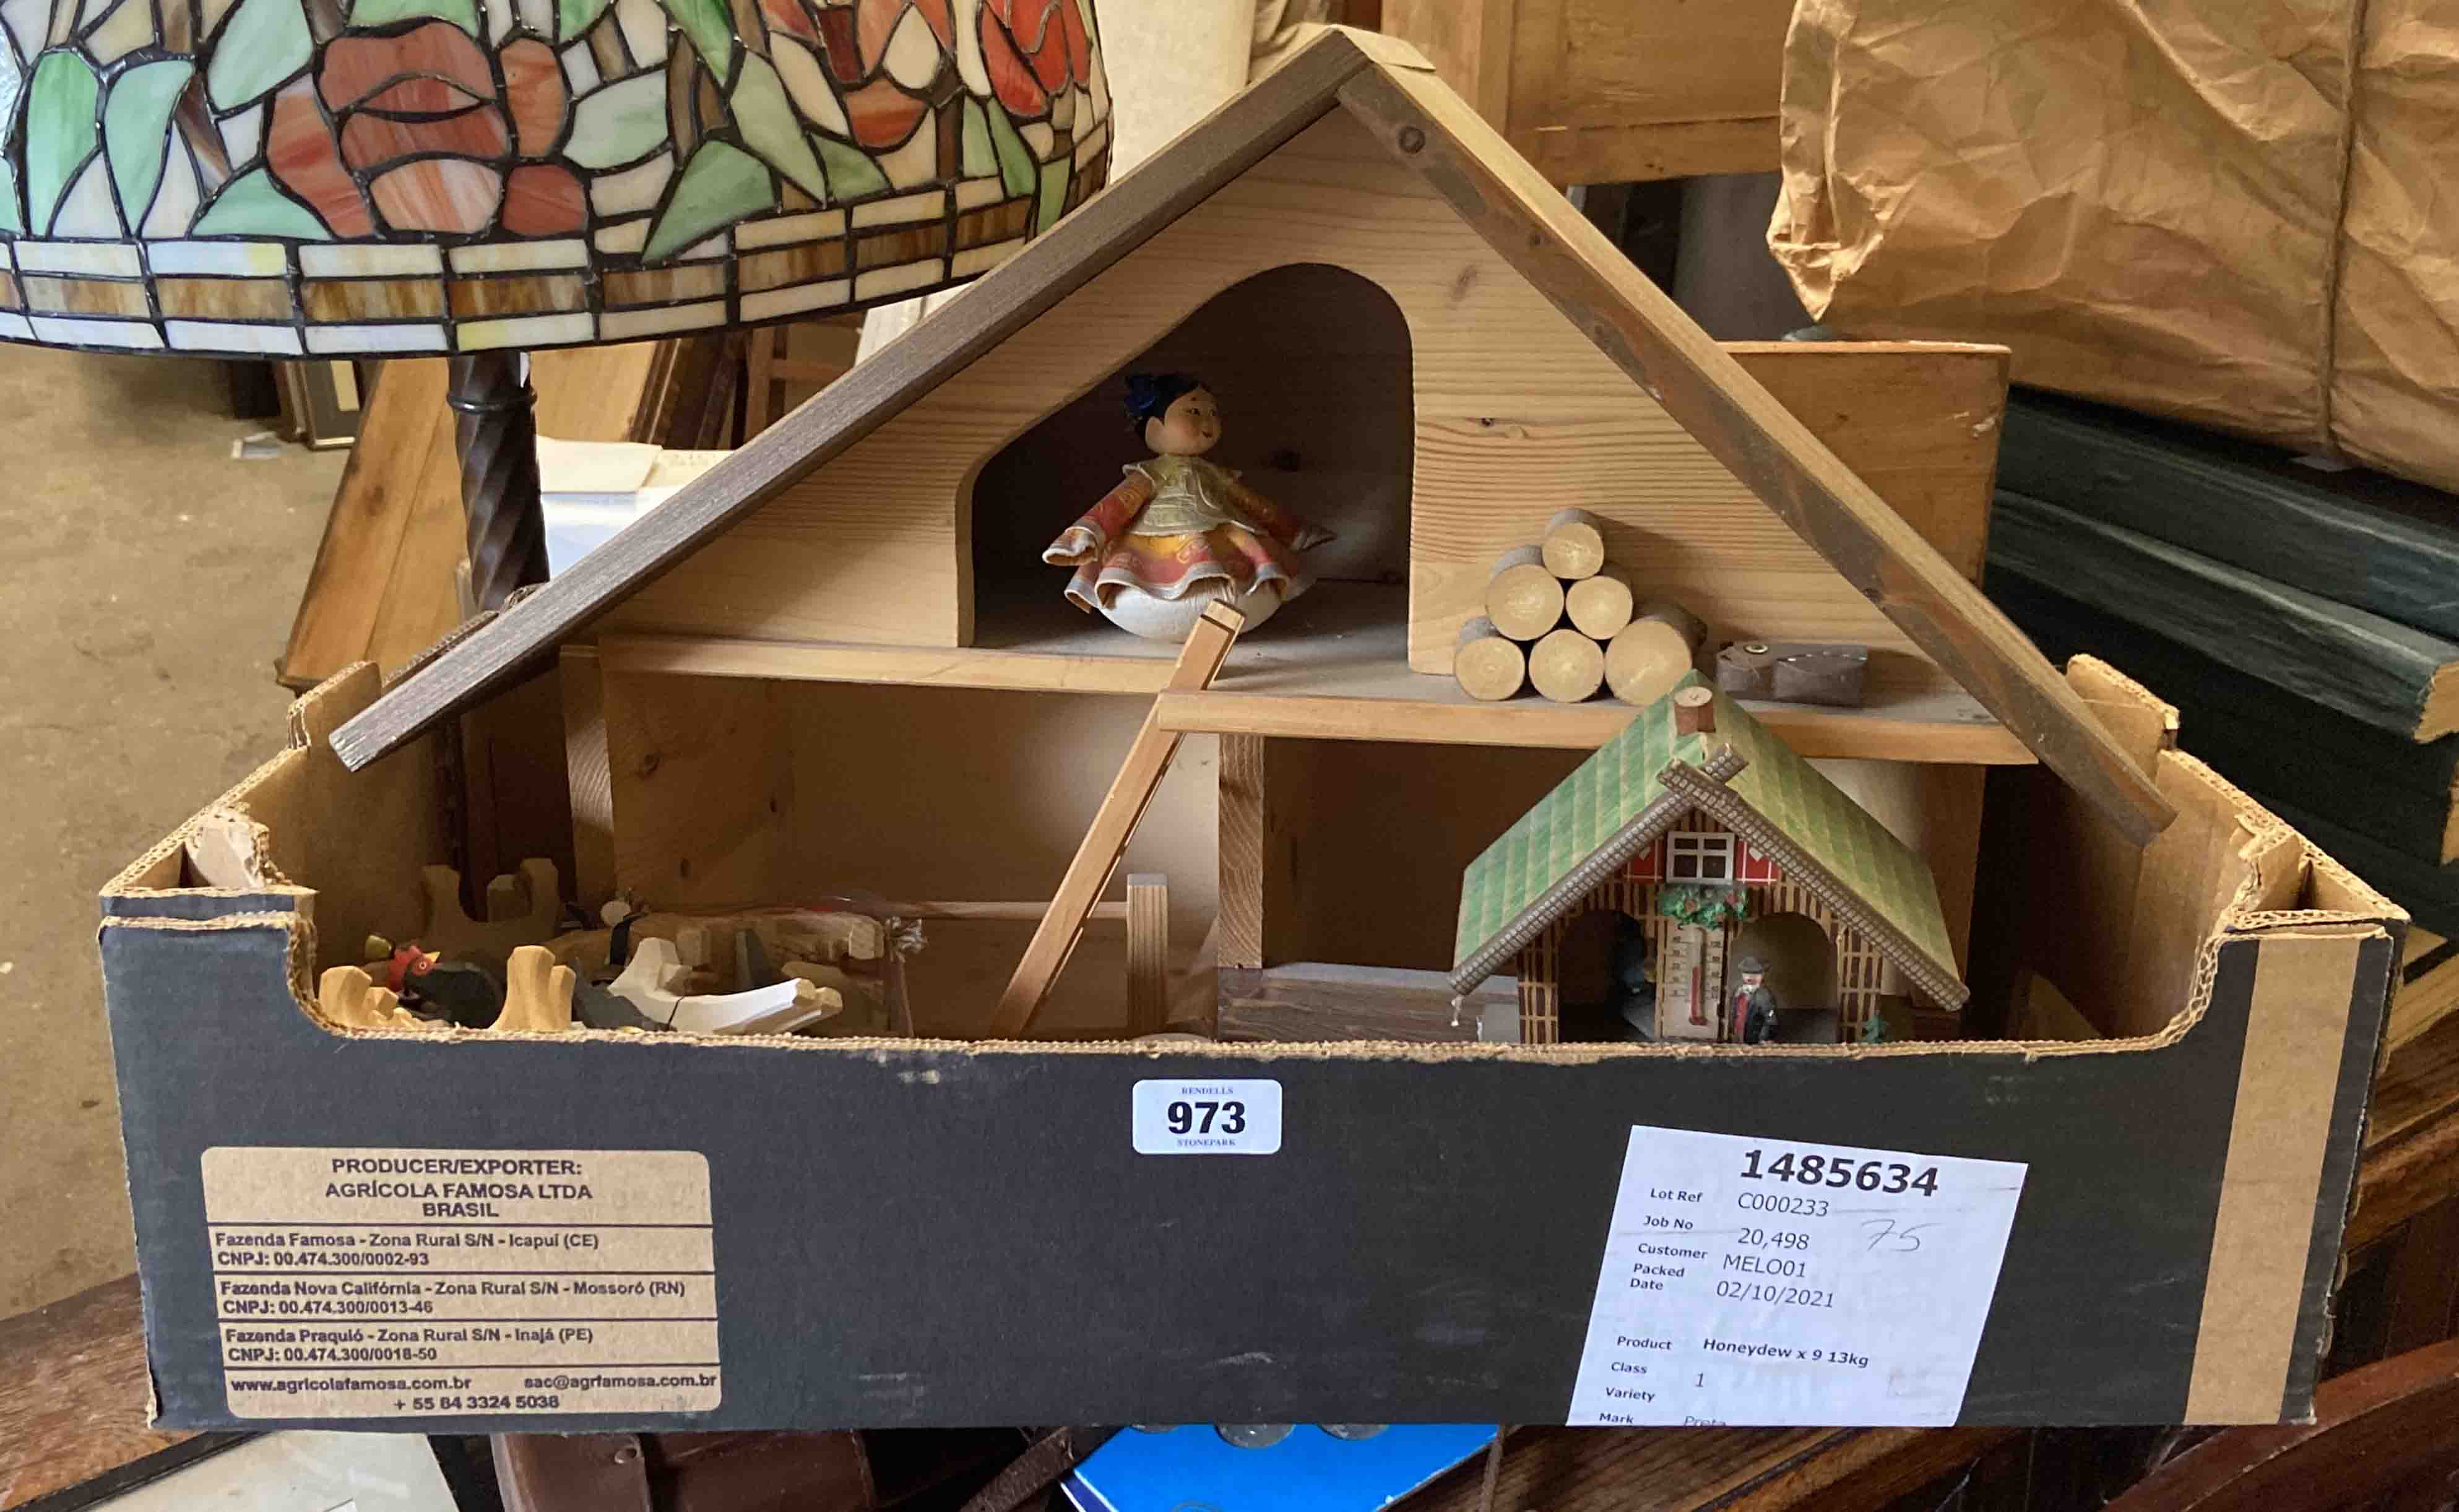 A box containing a model farmhouse with animals and other items